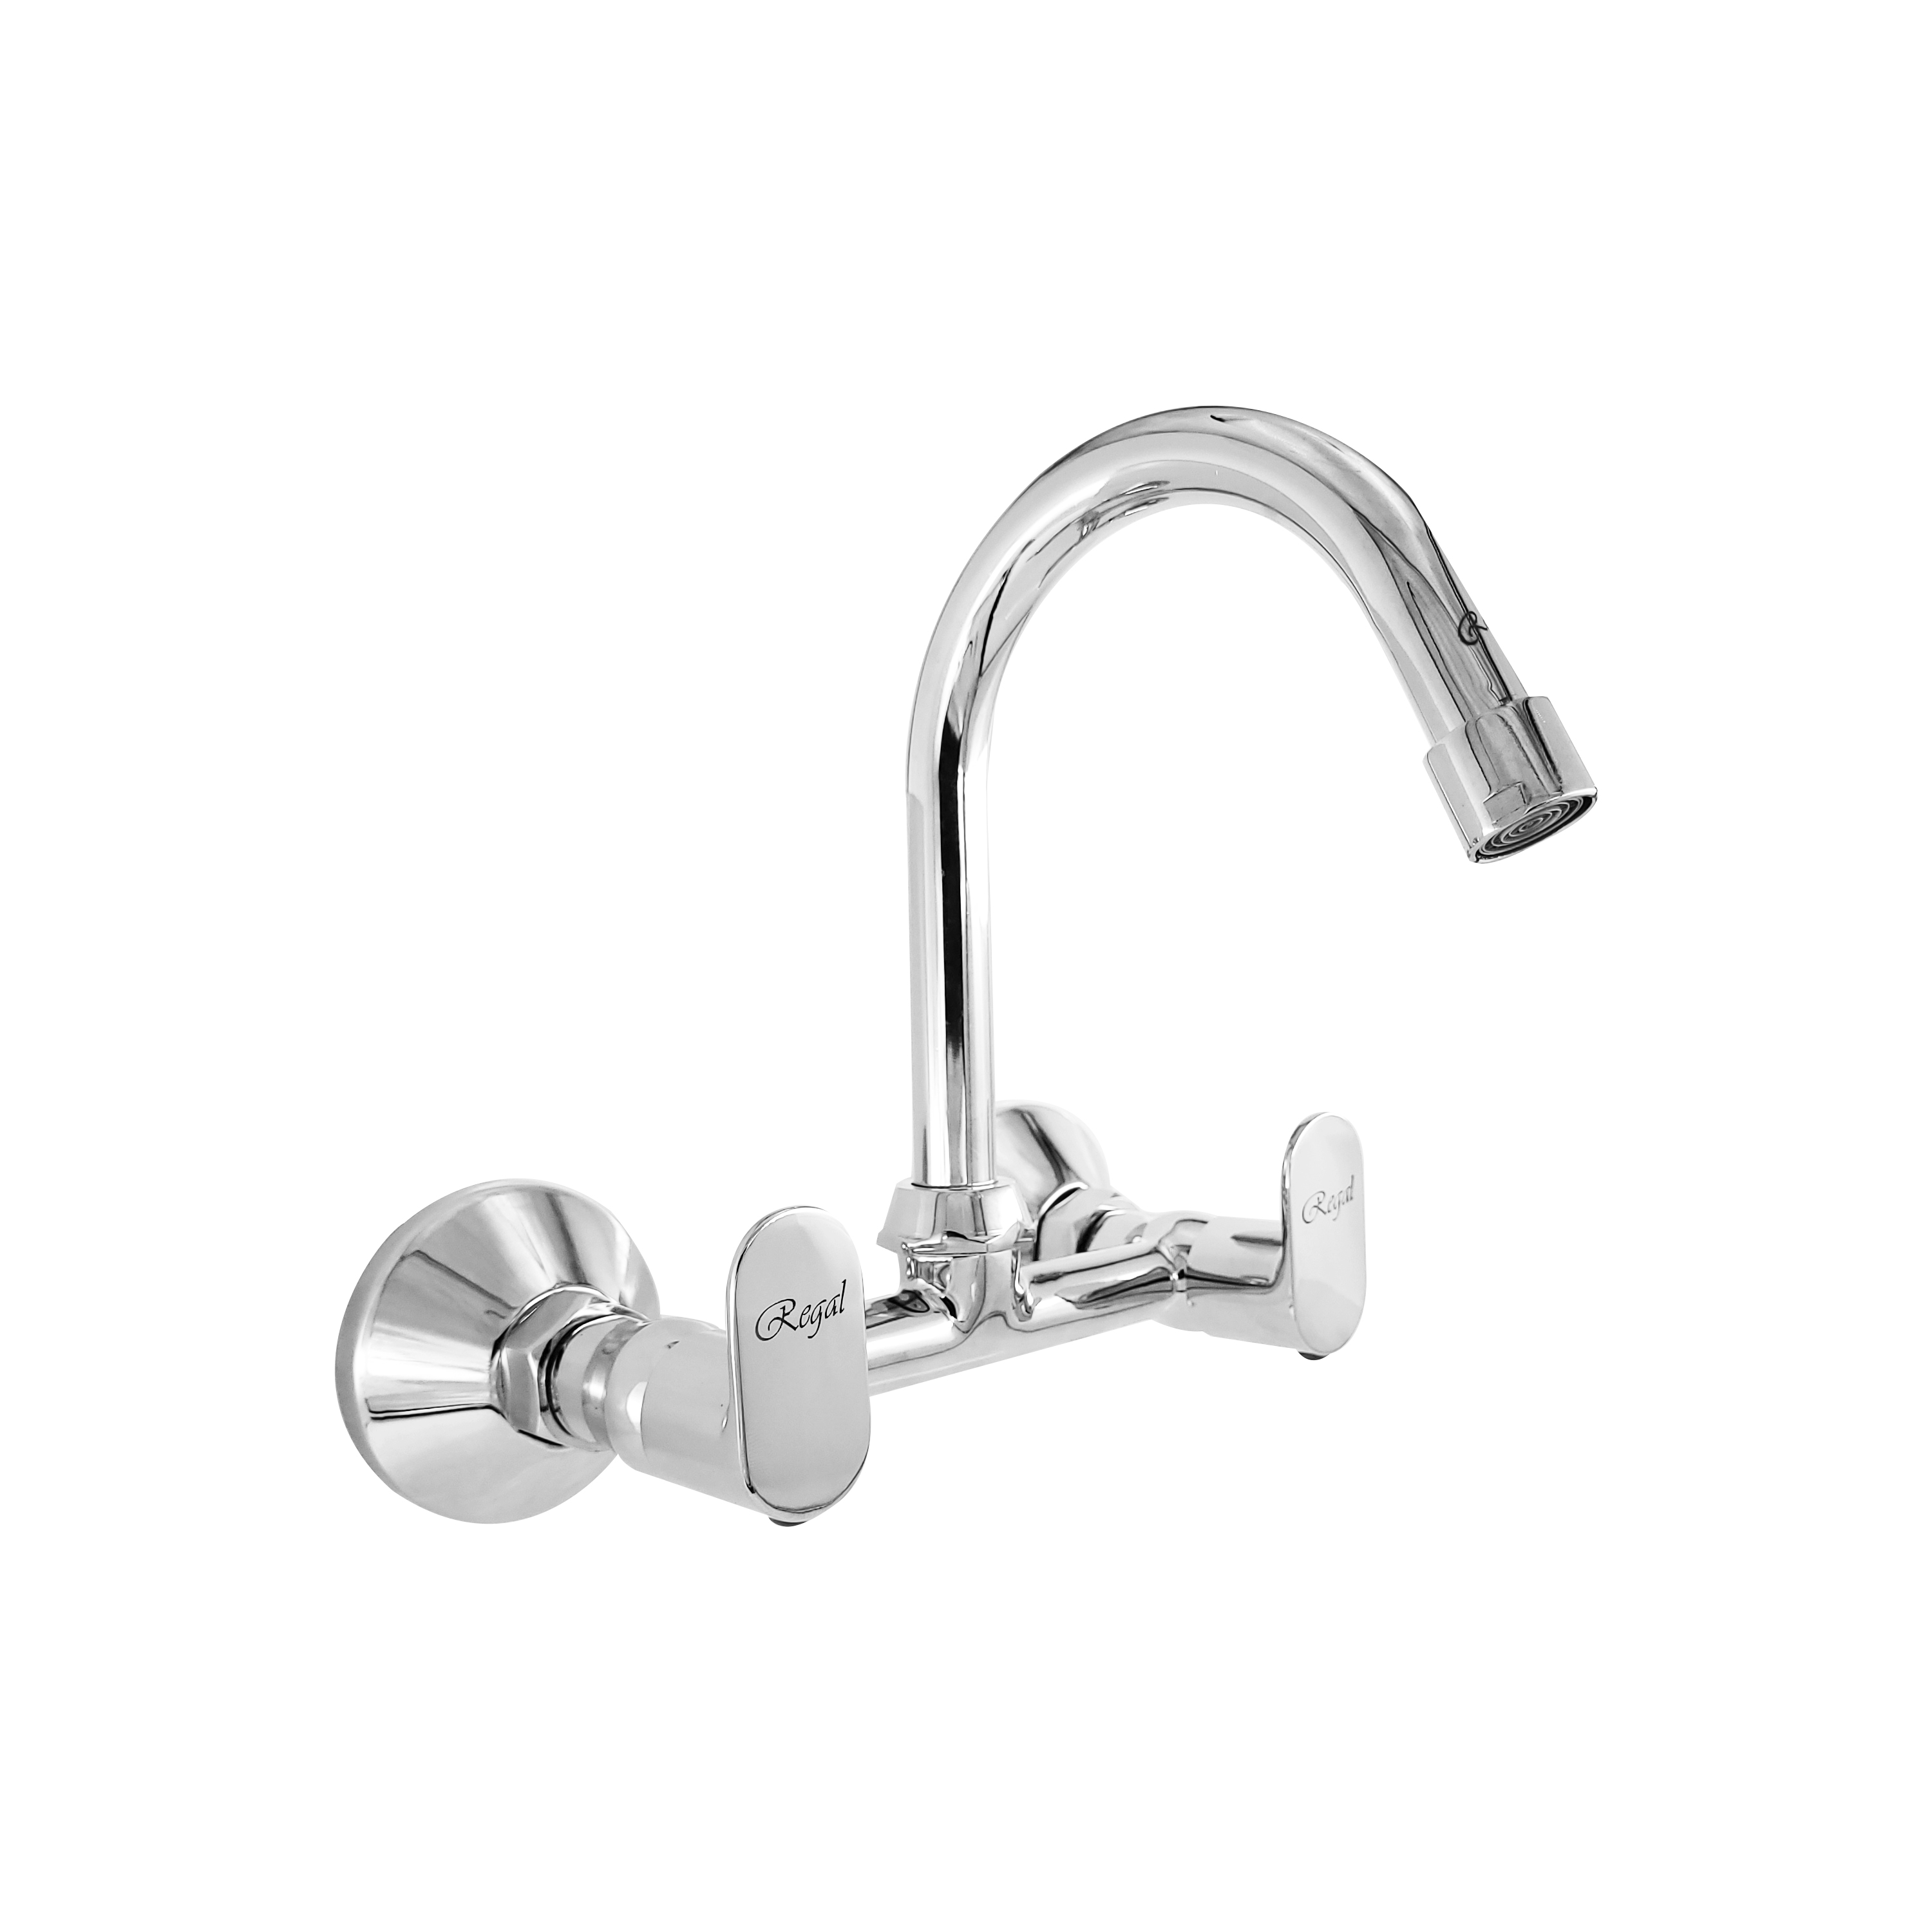 Veros Sink Mixer With Swivel Pipe Spout